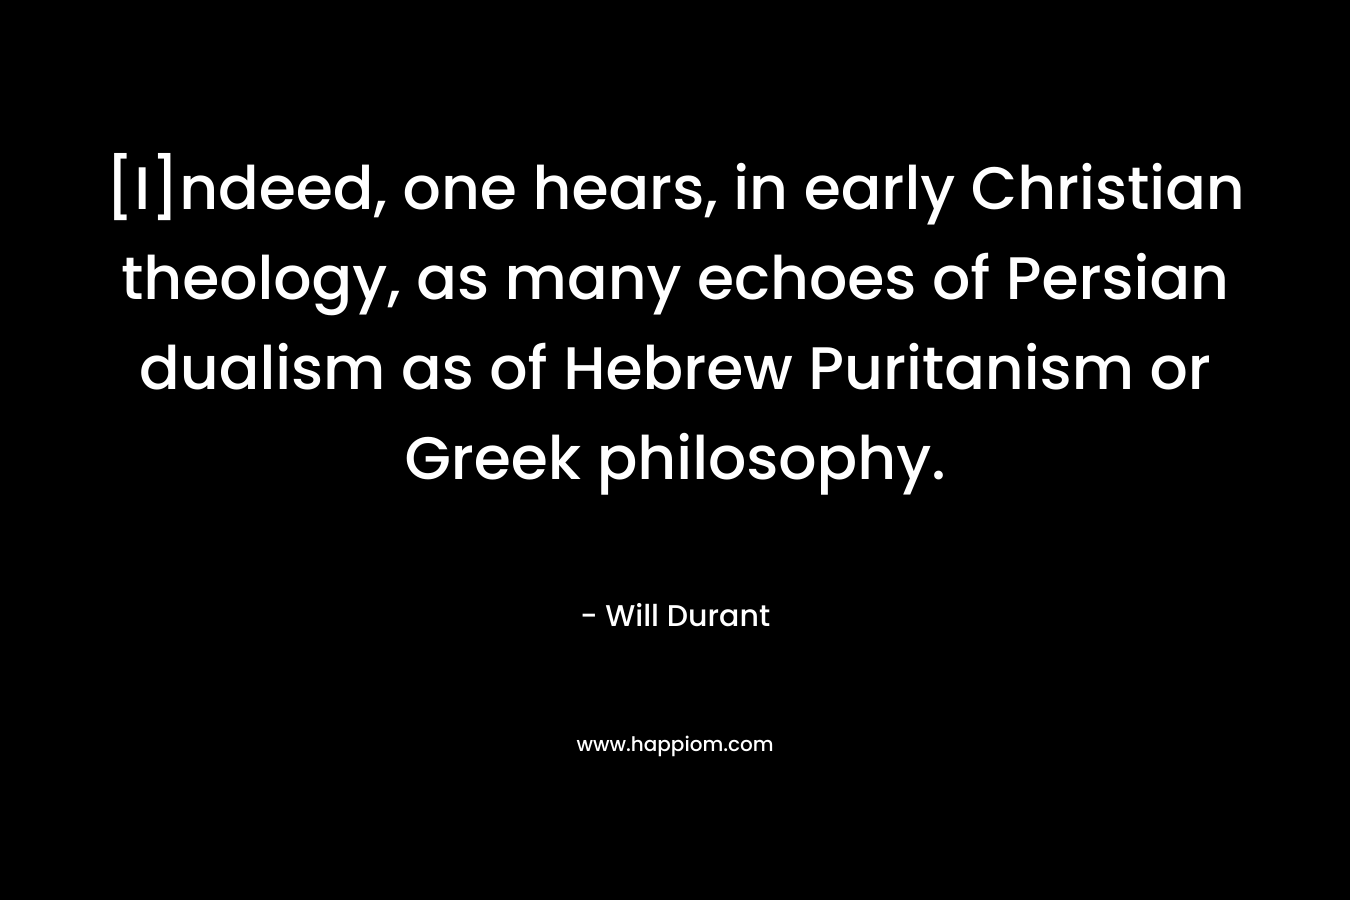 [I]ndeed, one hears, in early Christian theology, as many echoes of Persian dualism as of Hebrew Puritanism or Greek philosophy.